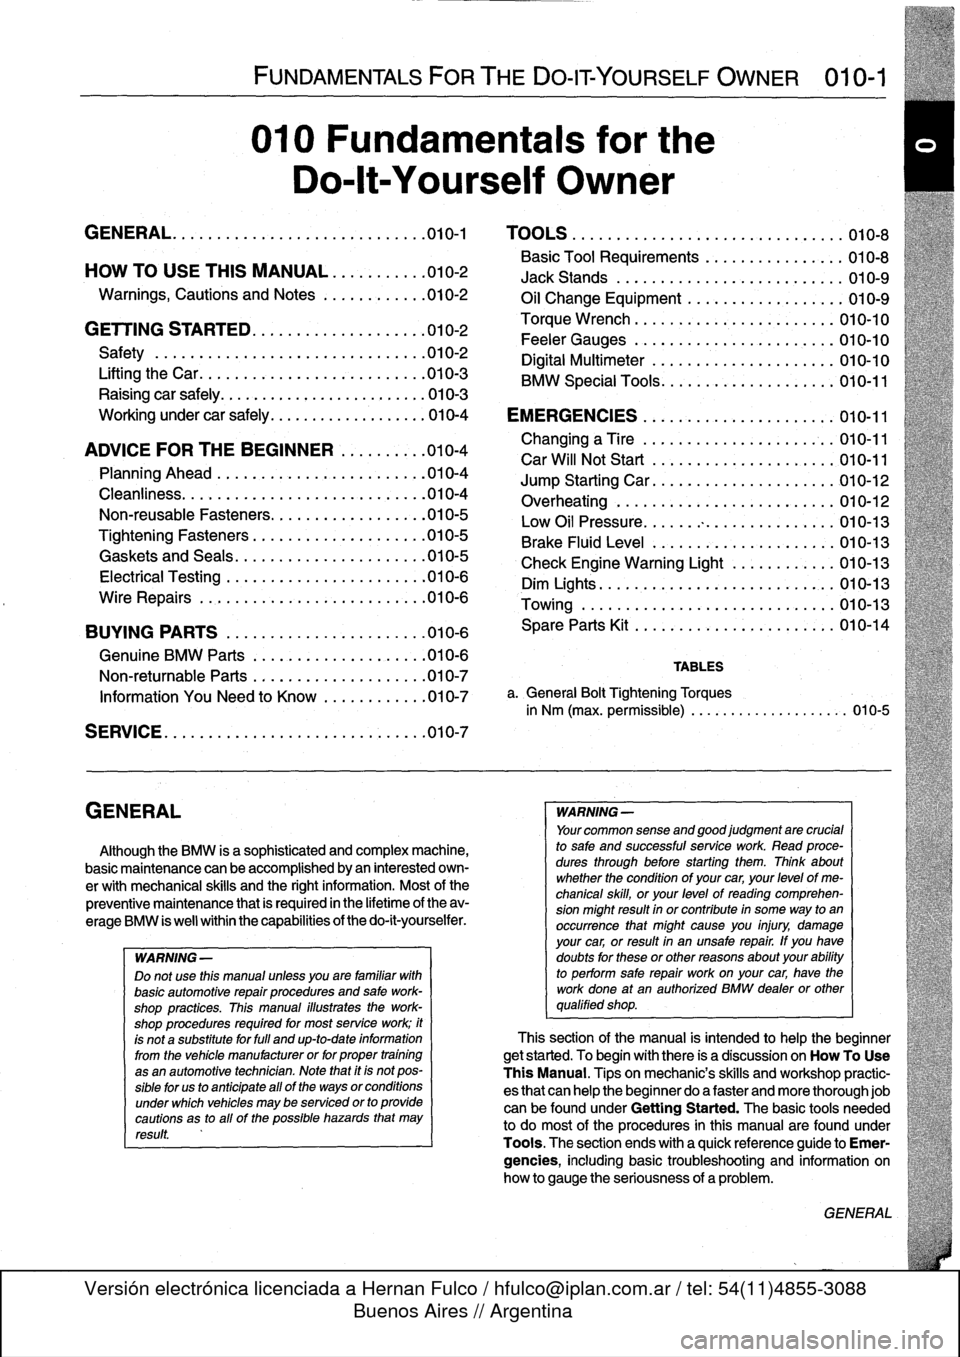 BMW M3 1996 E36 Workshop Manual 
GENERAL

FUNDAMENTALS
FORTHE
DO-IT
YOURSELF
OWNER

	

010-1

010
Fundamentals
for
the

Do-lt-Yourself
Owner

GENERAL
.......
.
.
.
......
.
.........
.
.
.010-1

	

TOOLS
.
.
...
.
............
.
...